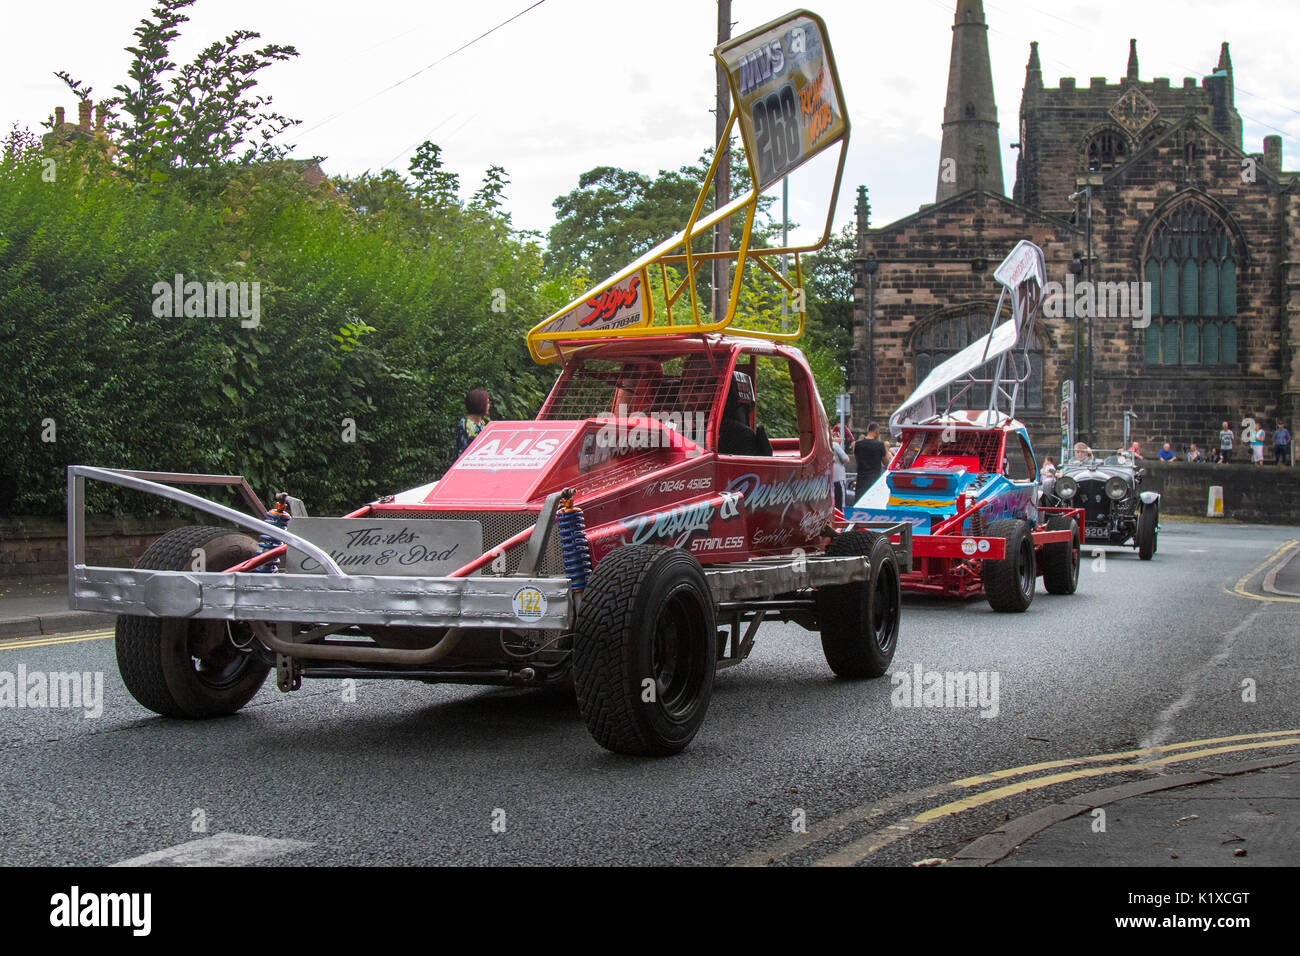 The 2017 Ormskirk MotorFest on Sunday 27 August. 300 vintage, classic cars from all eras of motoring lined up on town centre streets and in Coronation Park for people to admire. Thousands of people attended Ormskirk for this fantastic free family event to admire the fabulous range of vehicles. Stock Photo